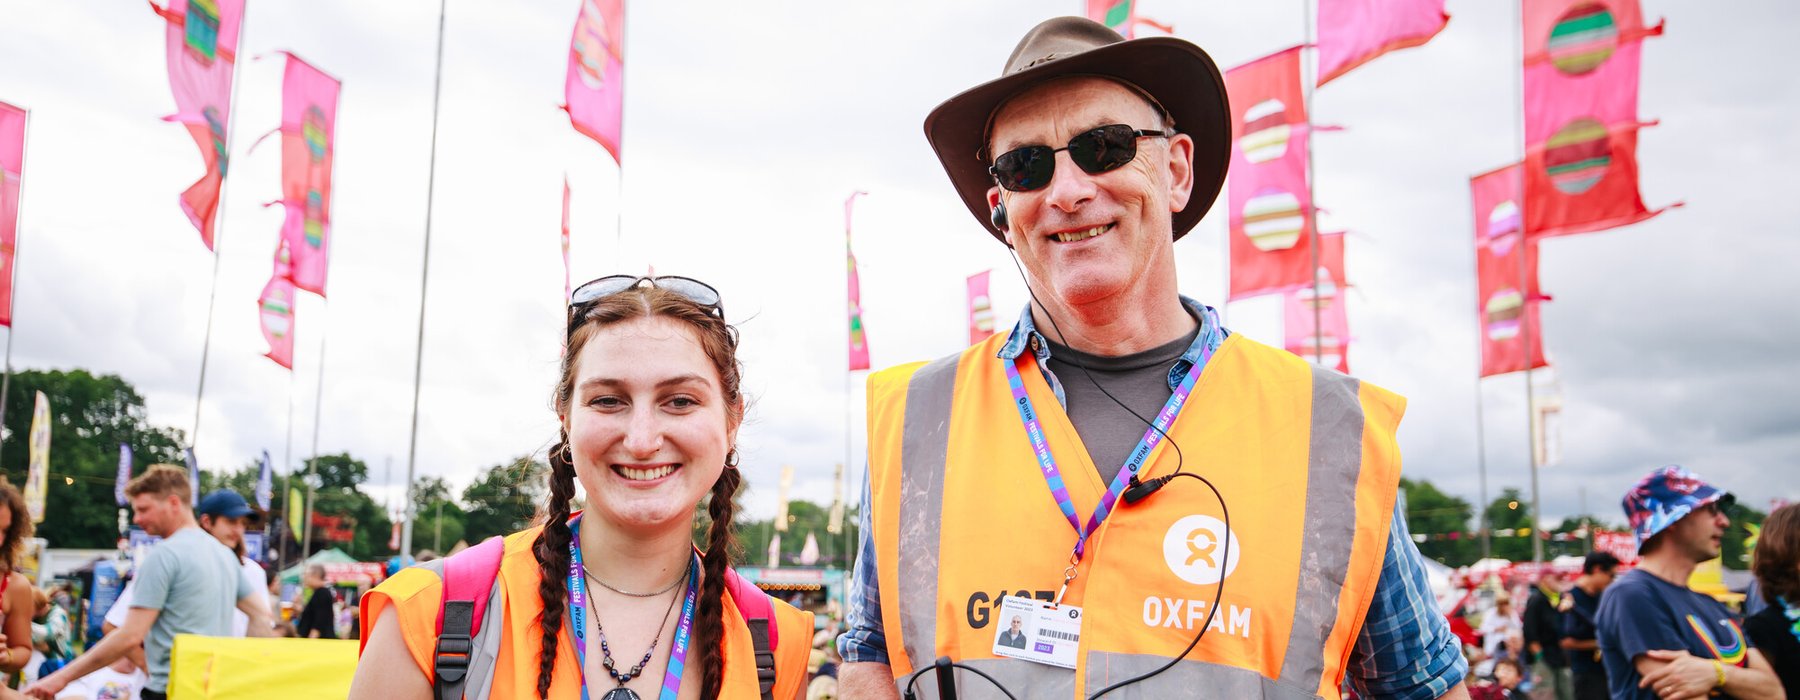 Oxfam Festival Stewards, Kat Atthey and Patrick O'Donnell smile at the camera while wearing Oxfam lanyards and orange visibility tabards at Womad Festival 2023.